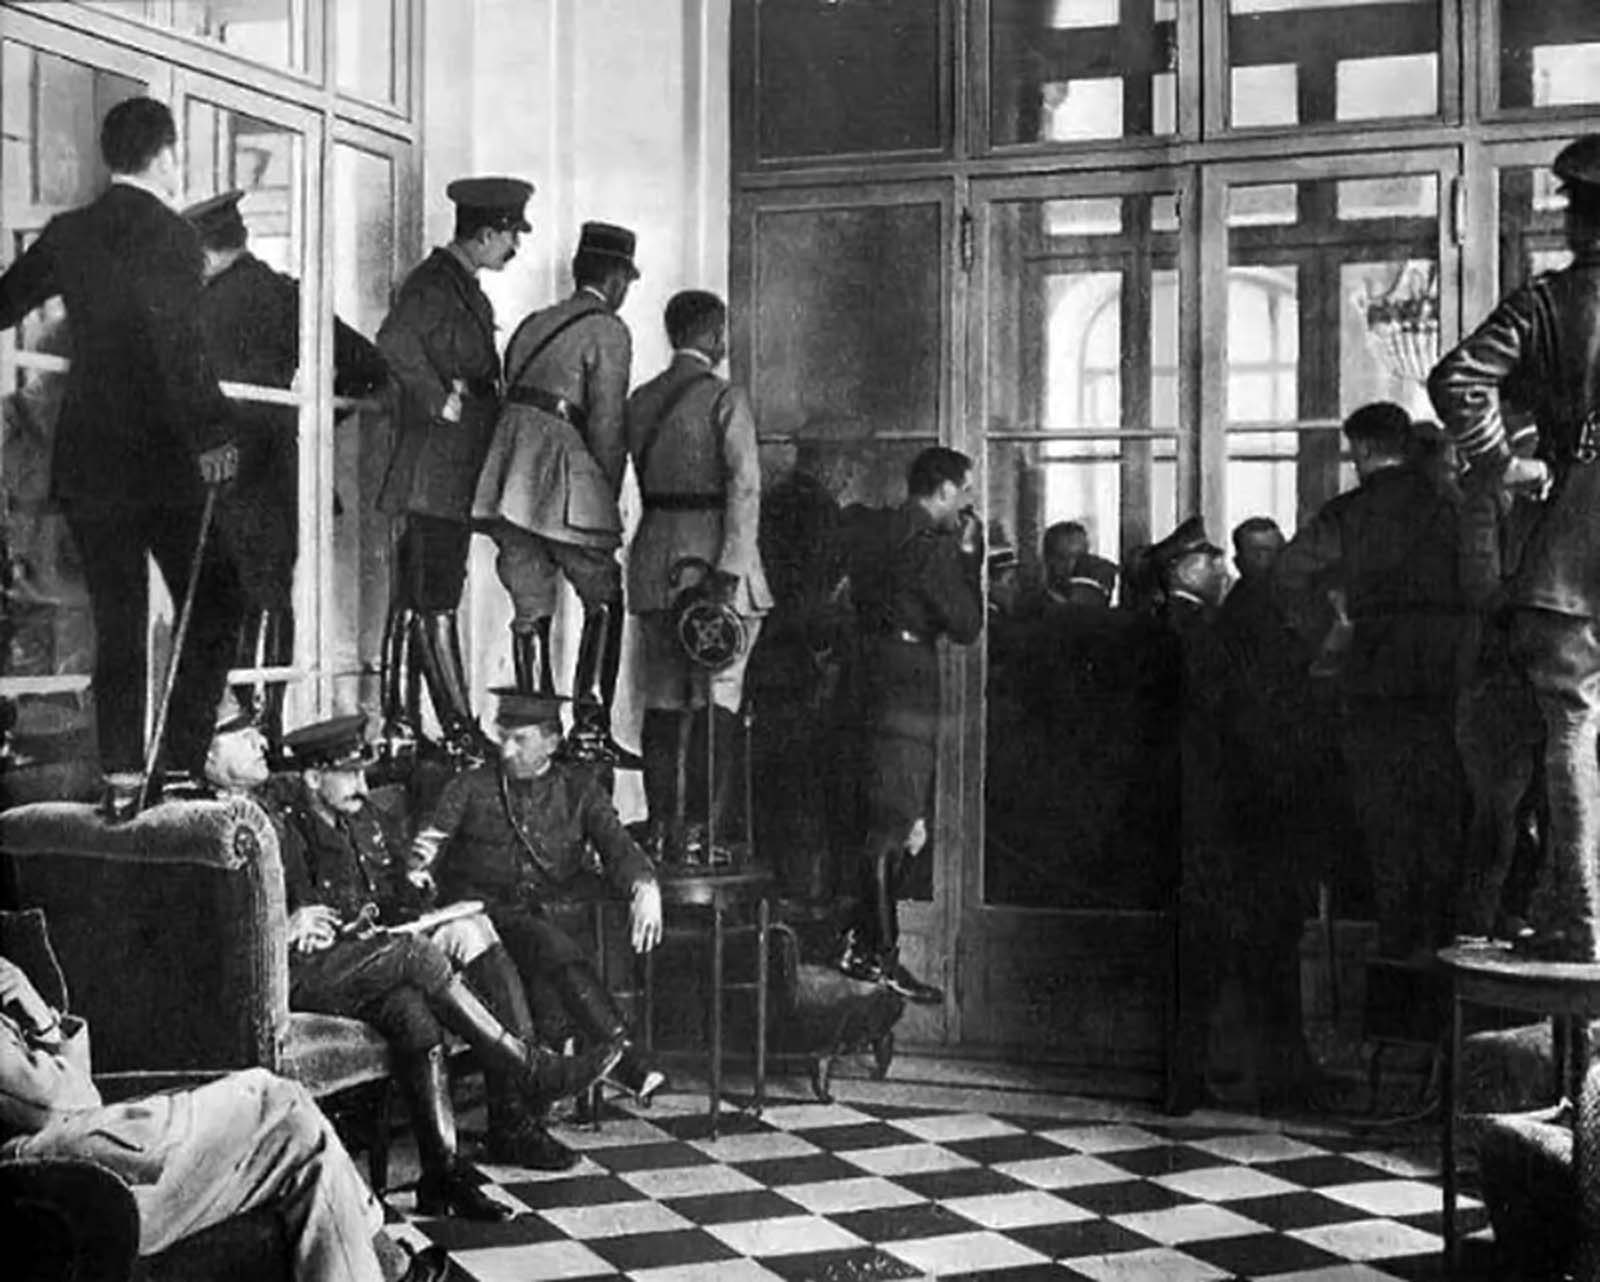 Military officers and politicians climbing over furniture to watch the signing of the Treaty of Versailles in the aftermath of World War 1. June 28th, 1919. 